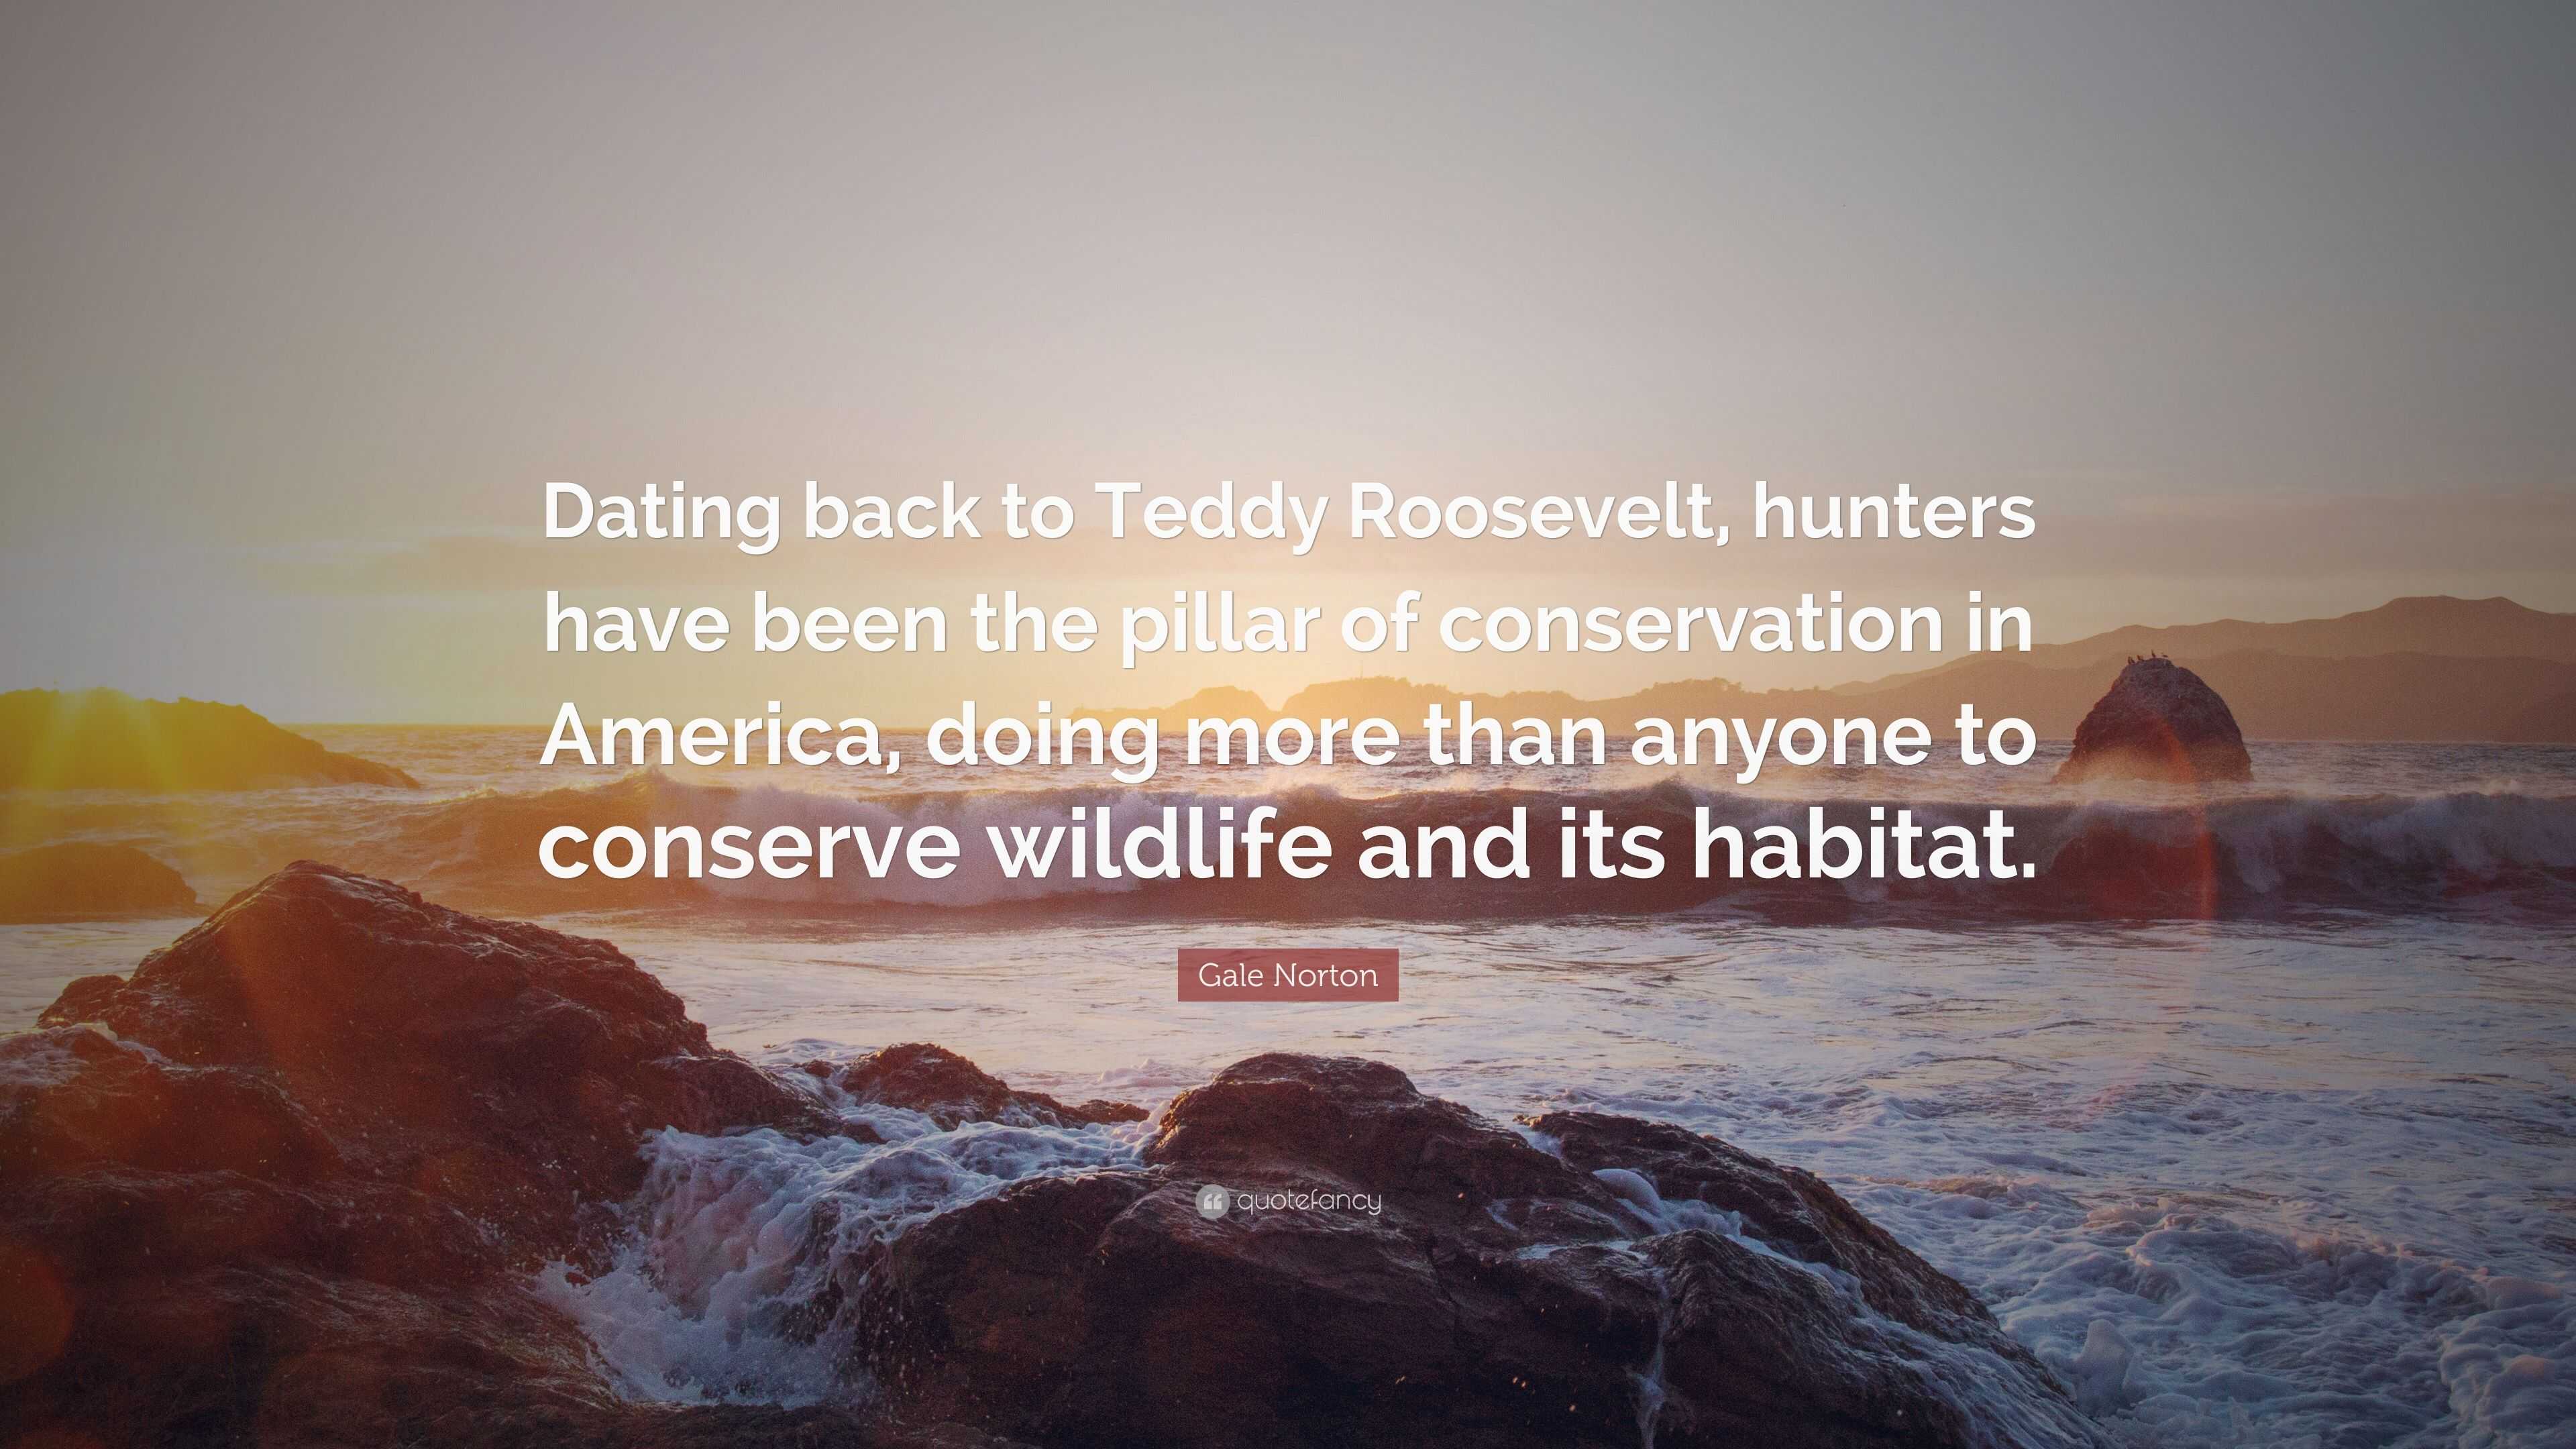 Conservation Taglines For Dating